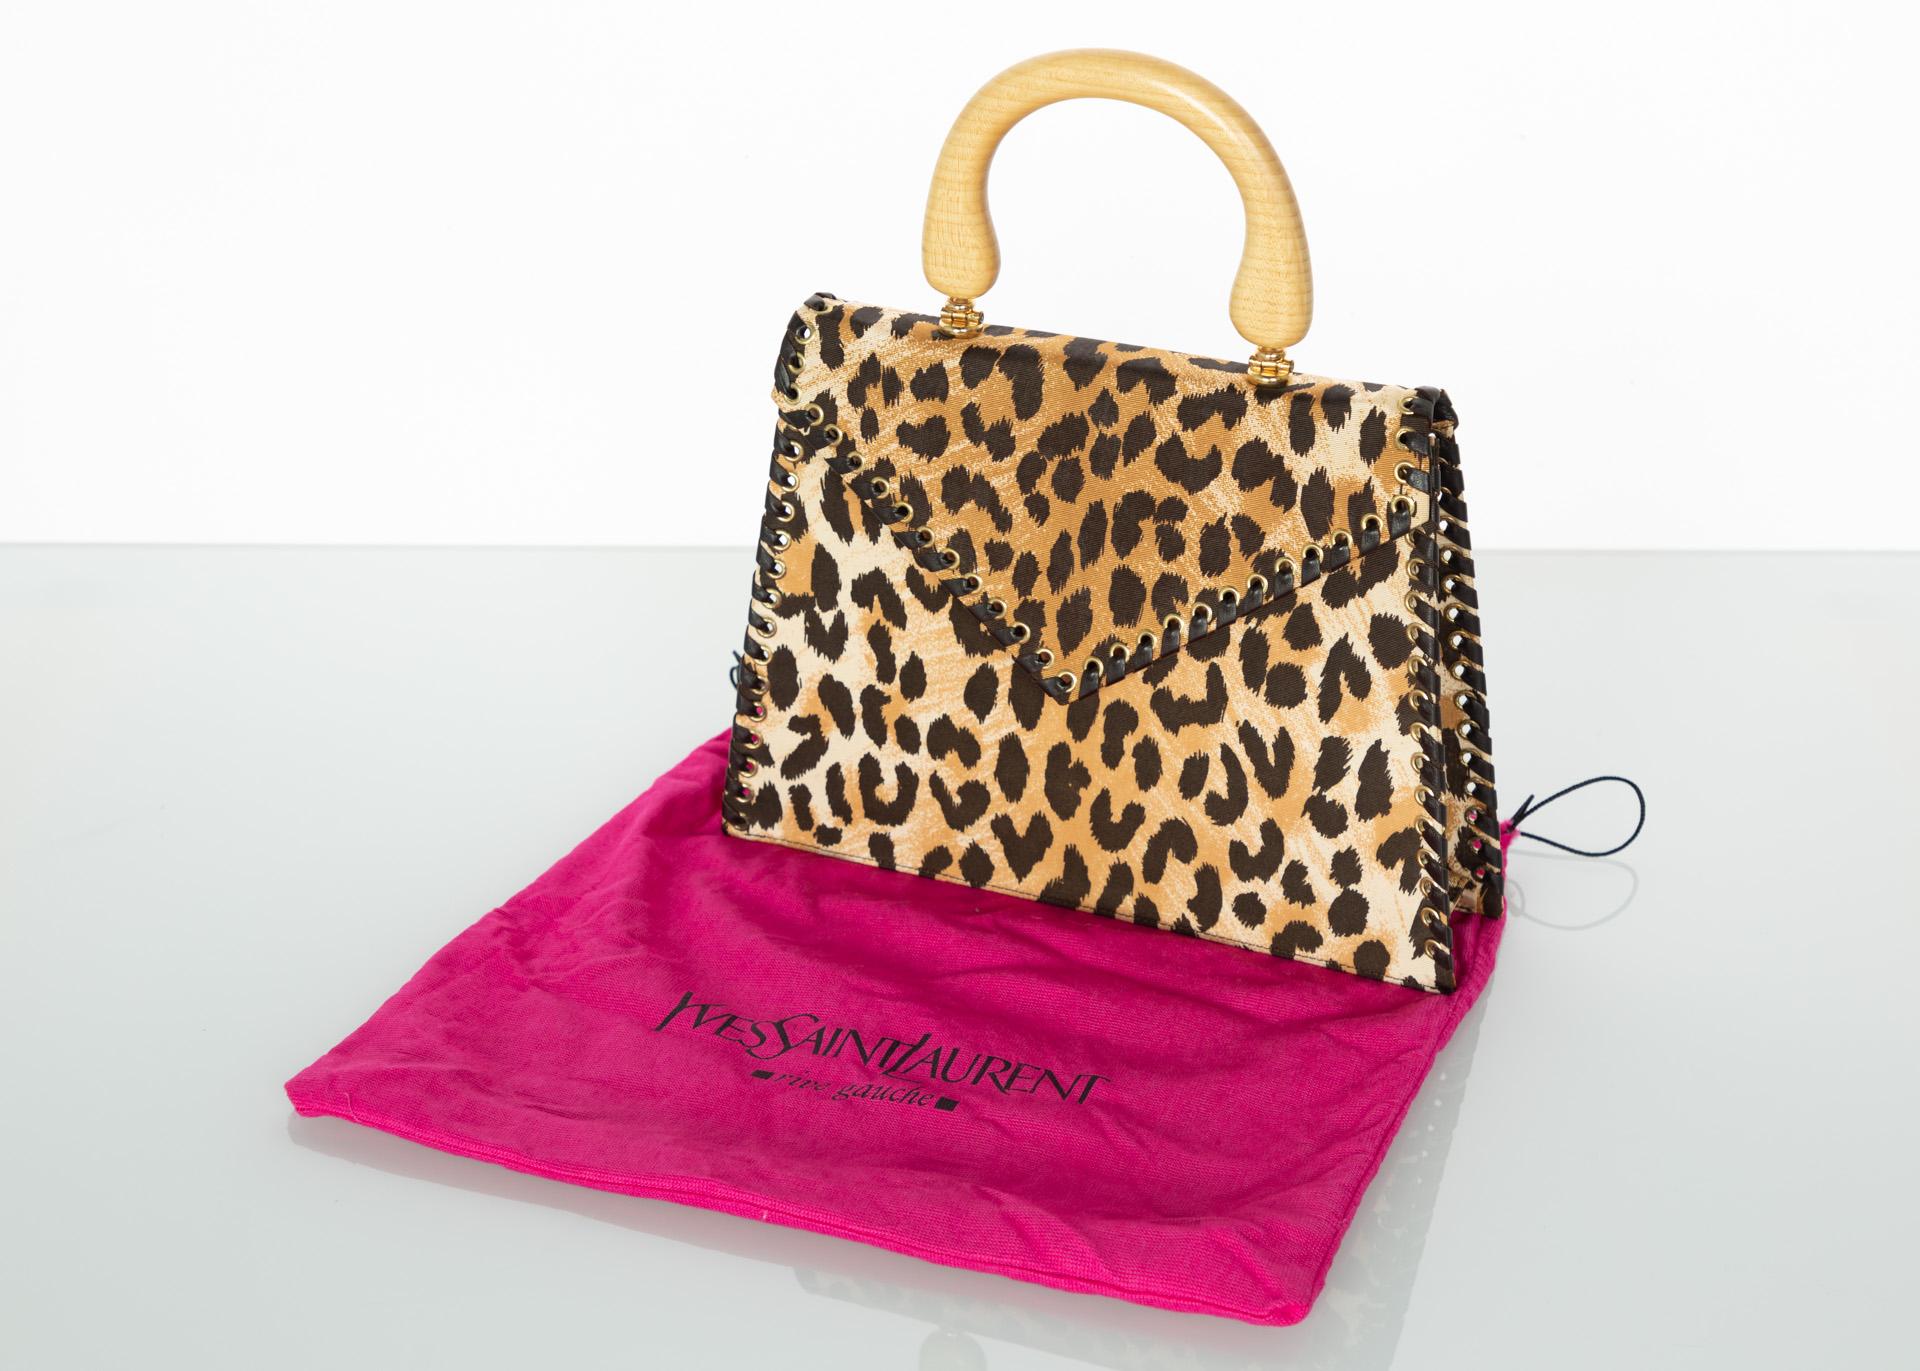 Yves Saint Laurent  Leopard Animal Print Canvas Wooden Top Handle Bag, 1990s In Excellent Condition For Sale In Boca Raton, FL